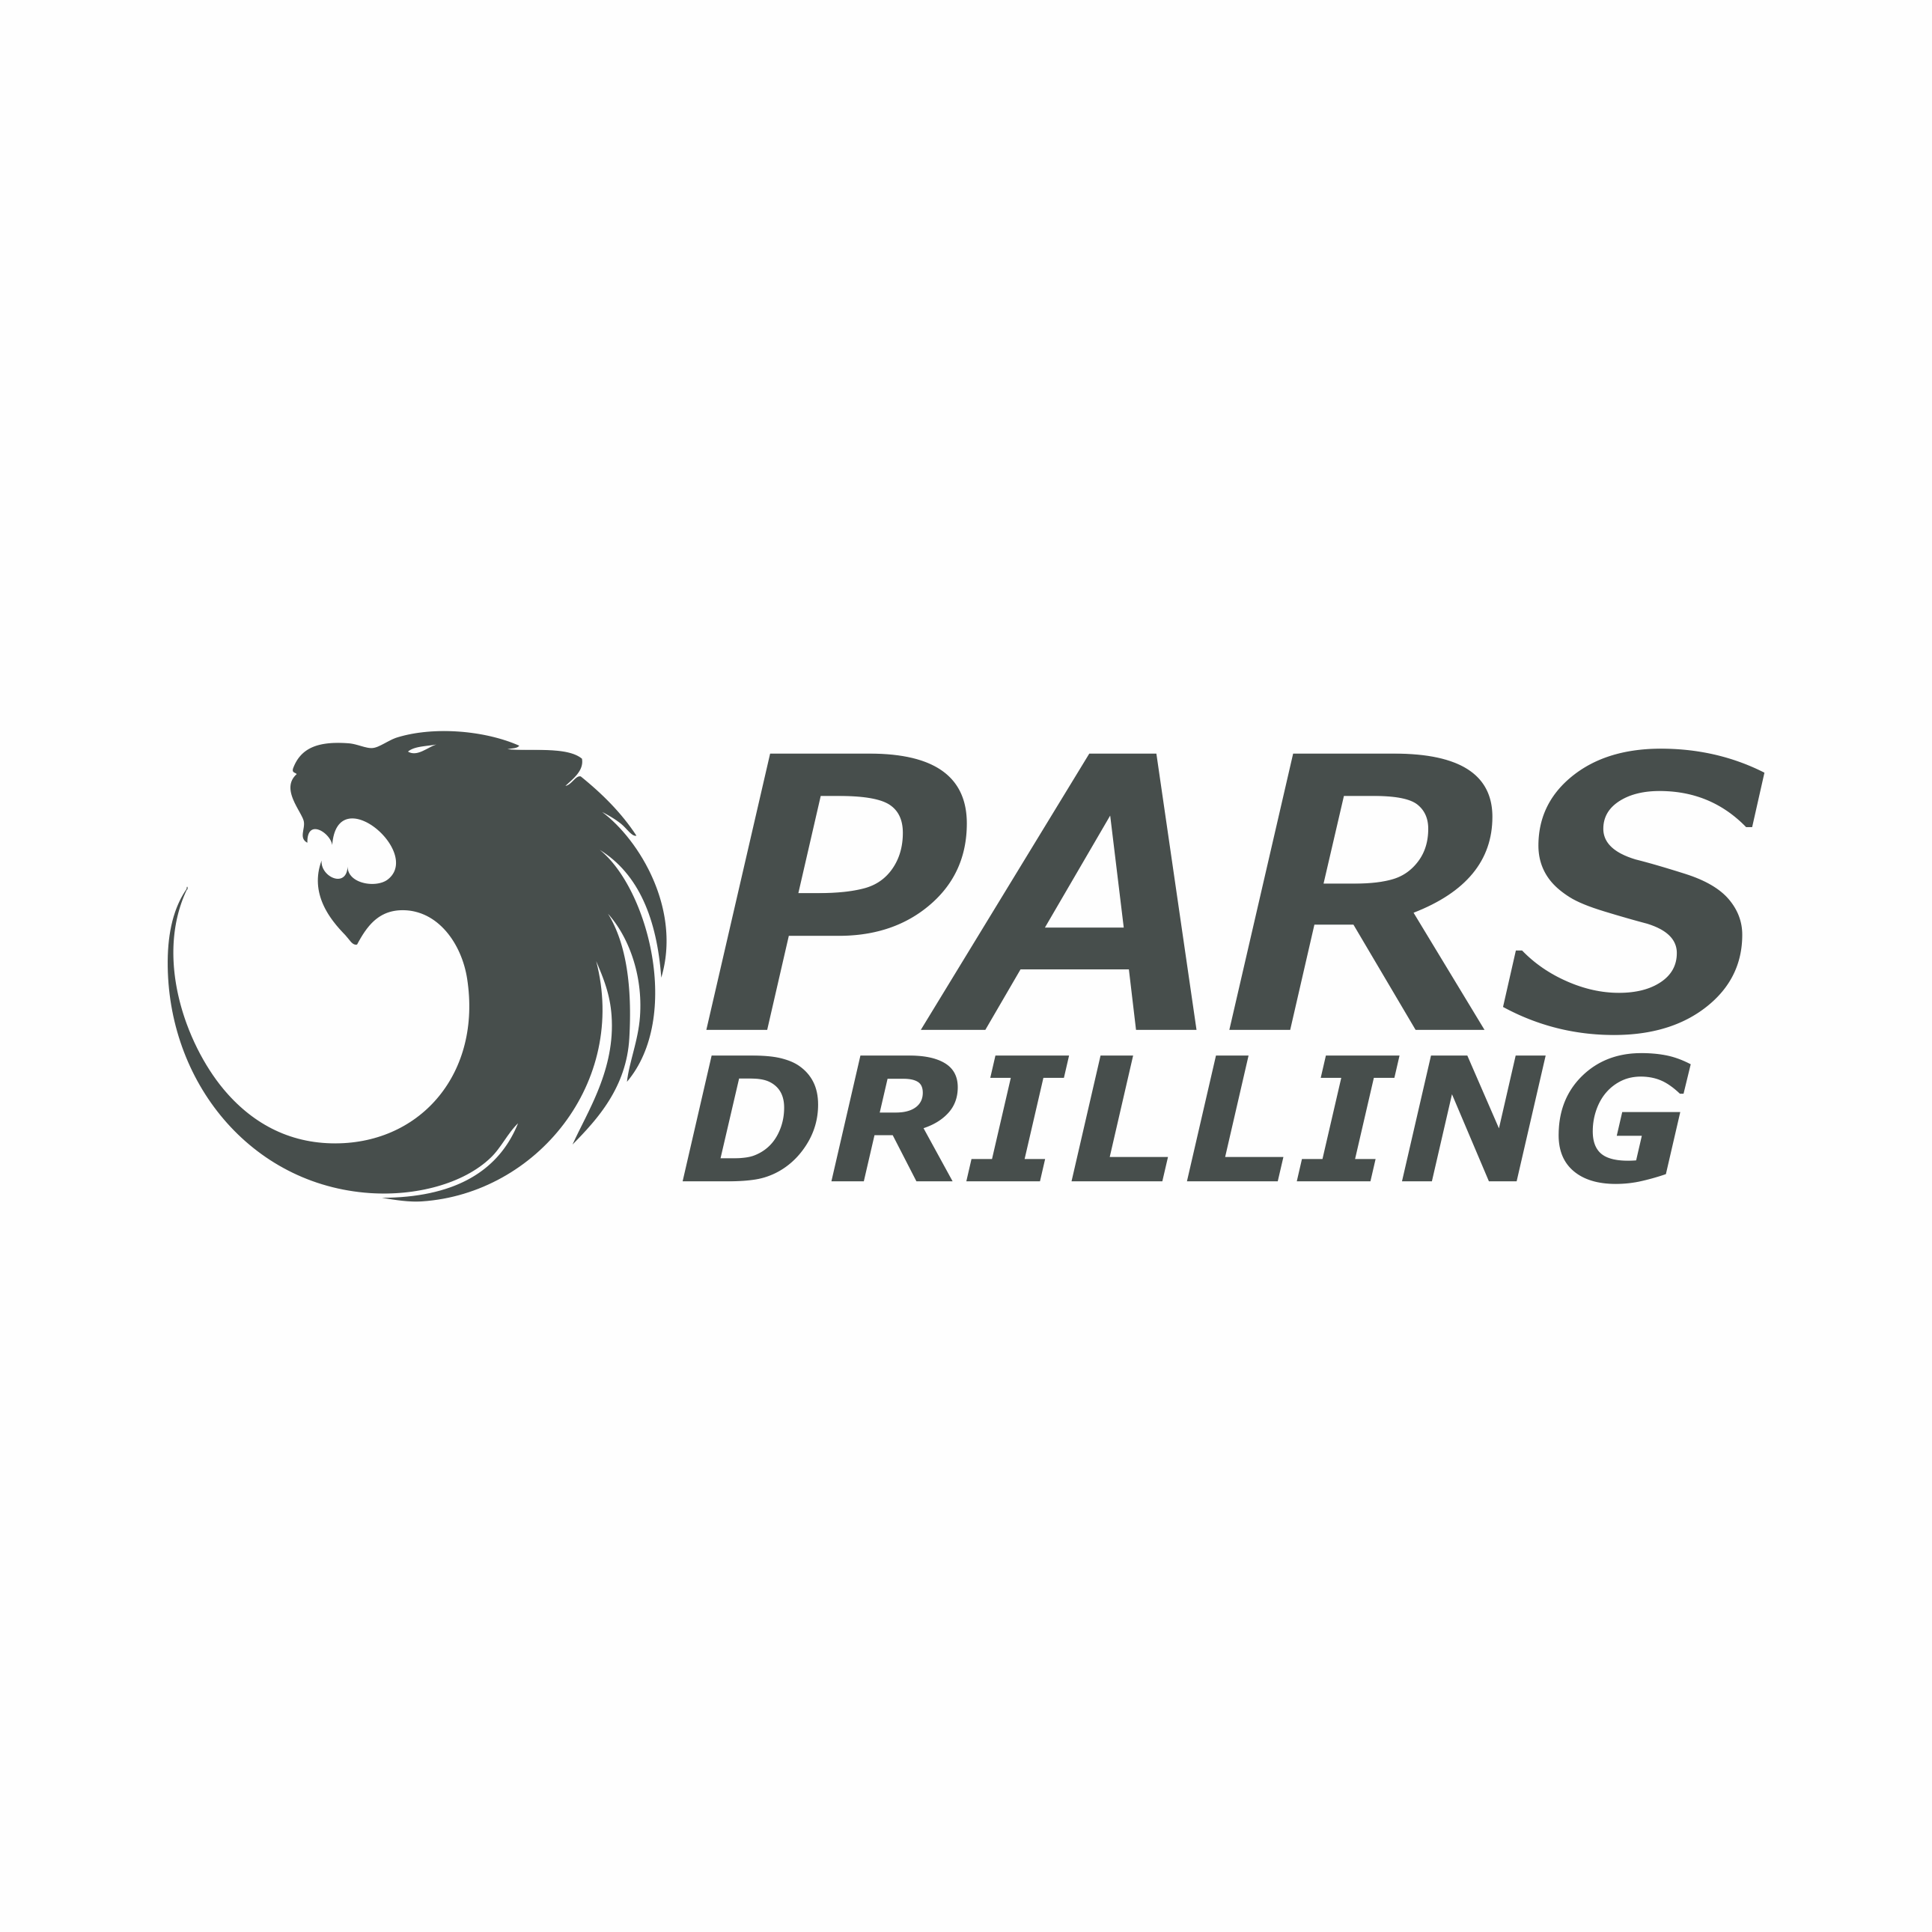 PARS DRILLING